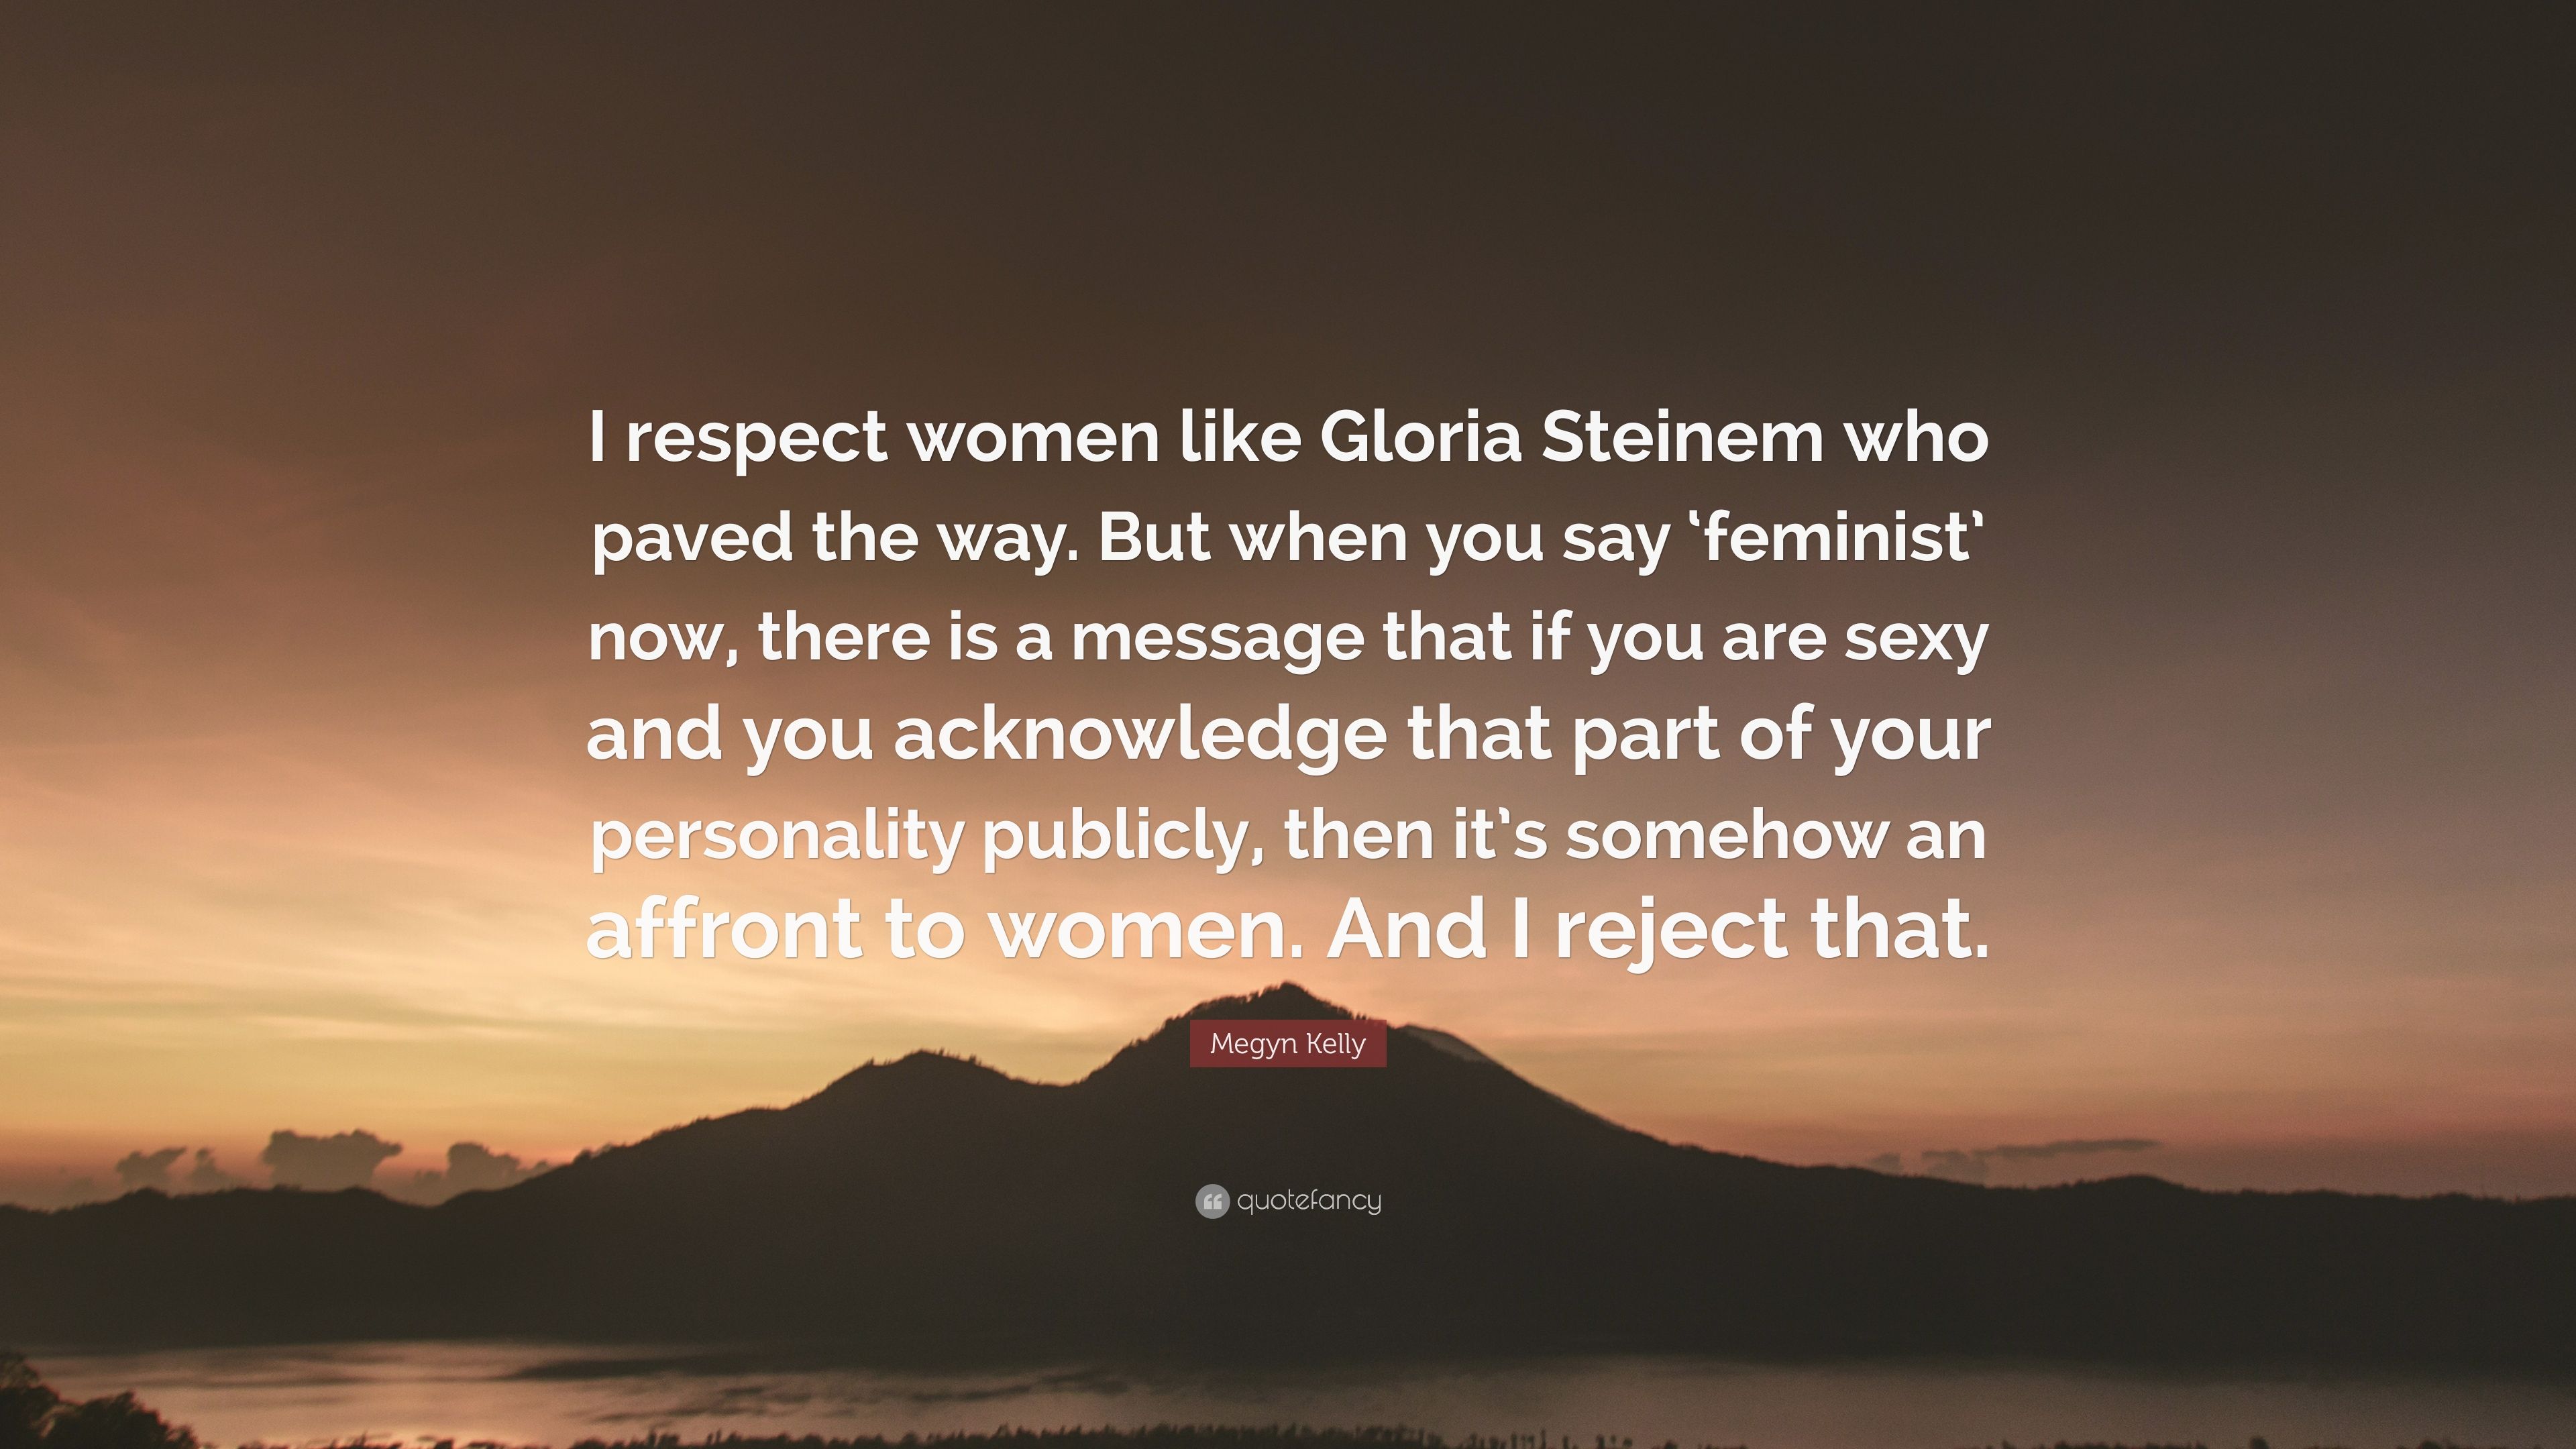 Megyn Kelly Quote: “I respect women like Gloria Steinem who paved